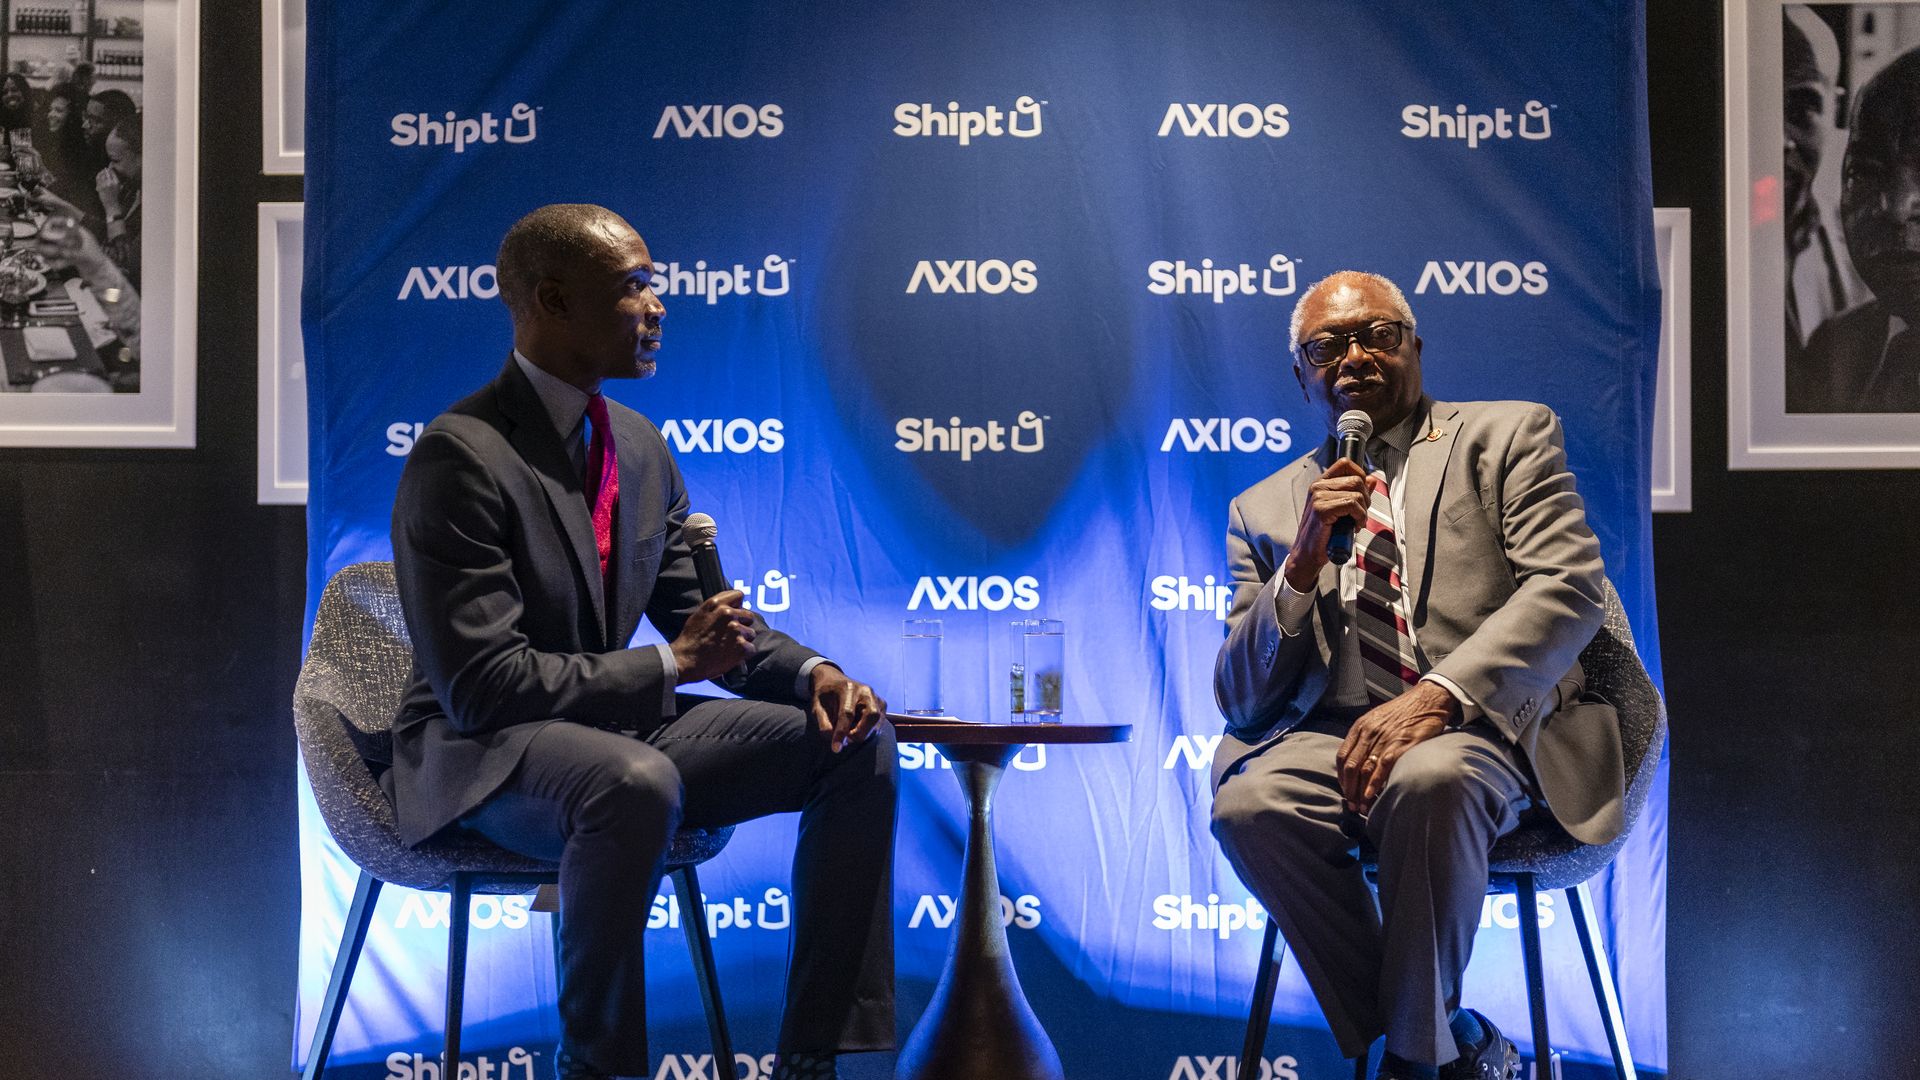 Rep. James Clyburn on the Axios stage.